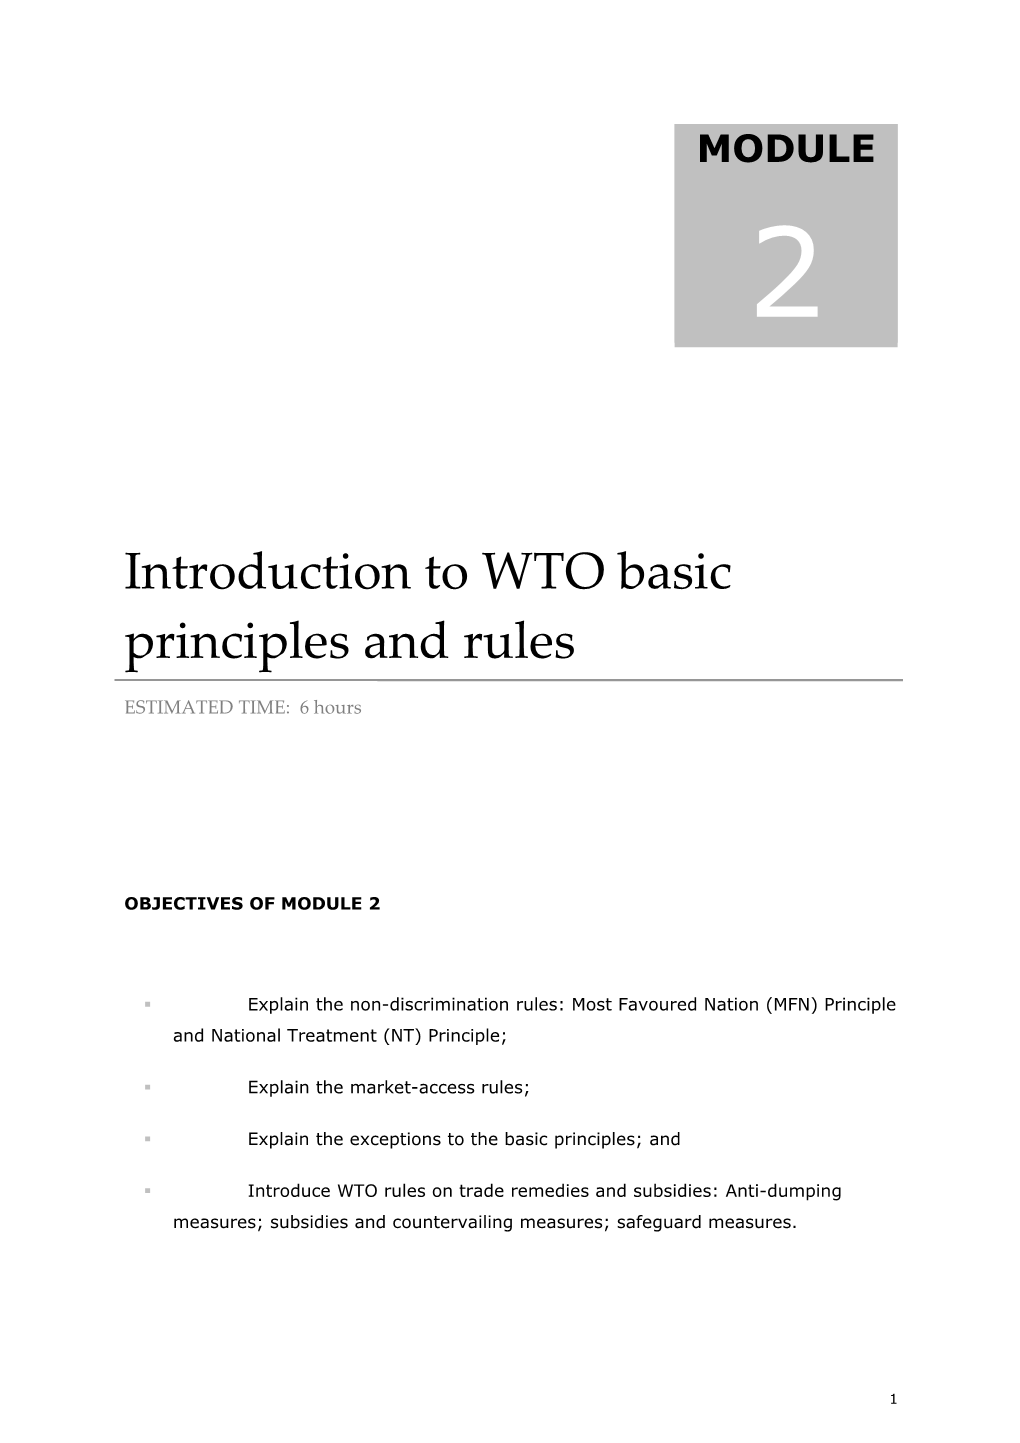 M2 - Introduction to WTO Basic Principles and Rules